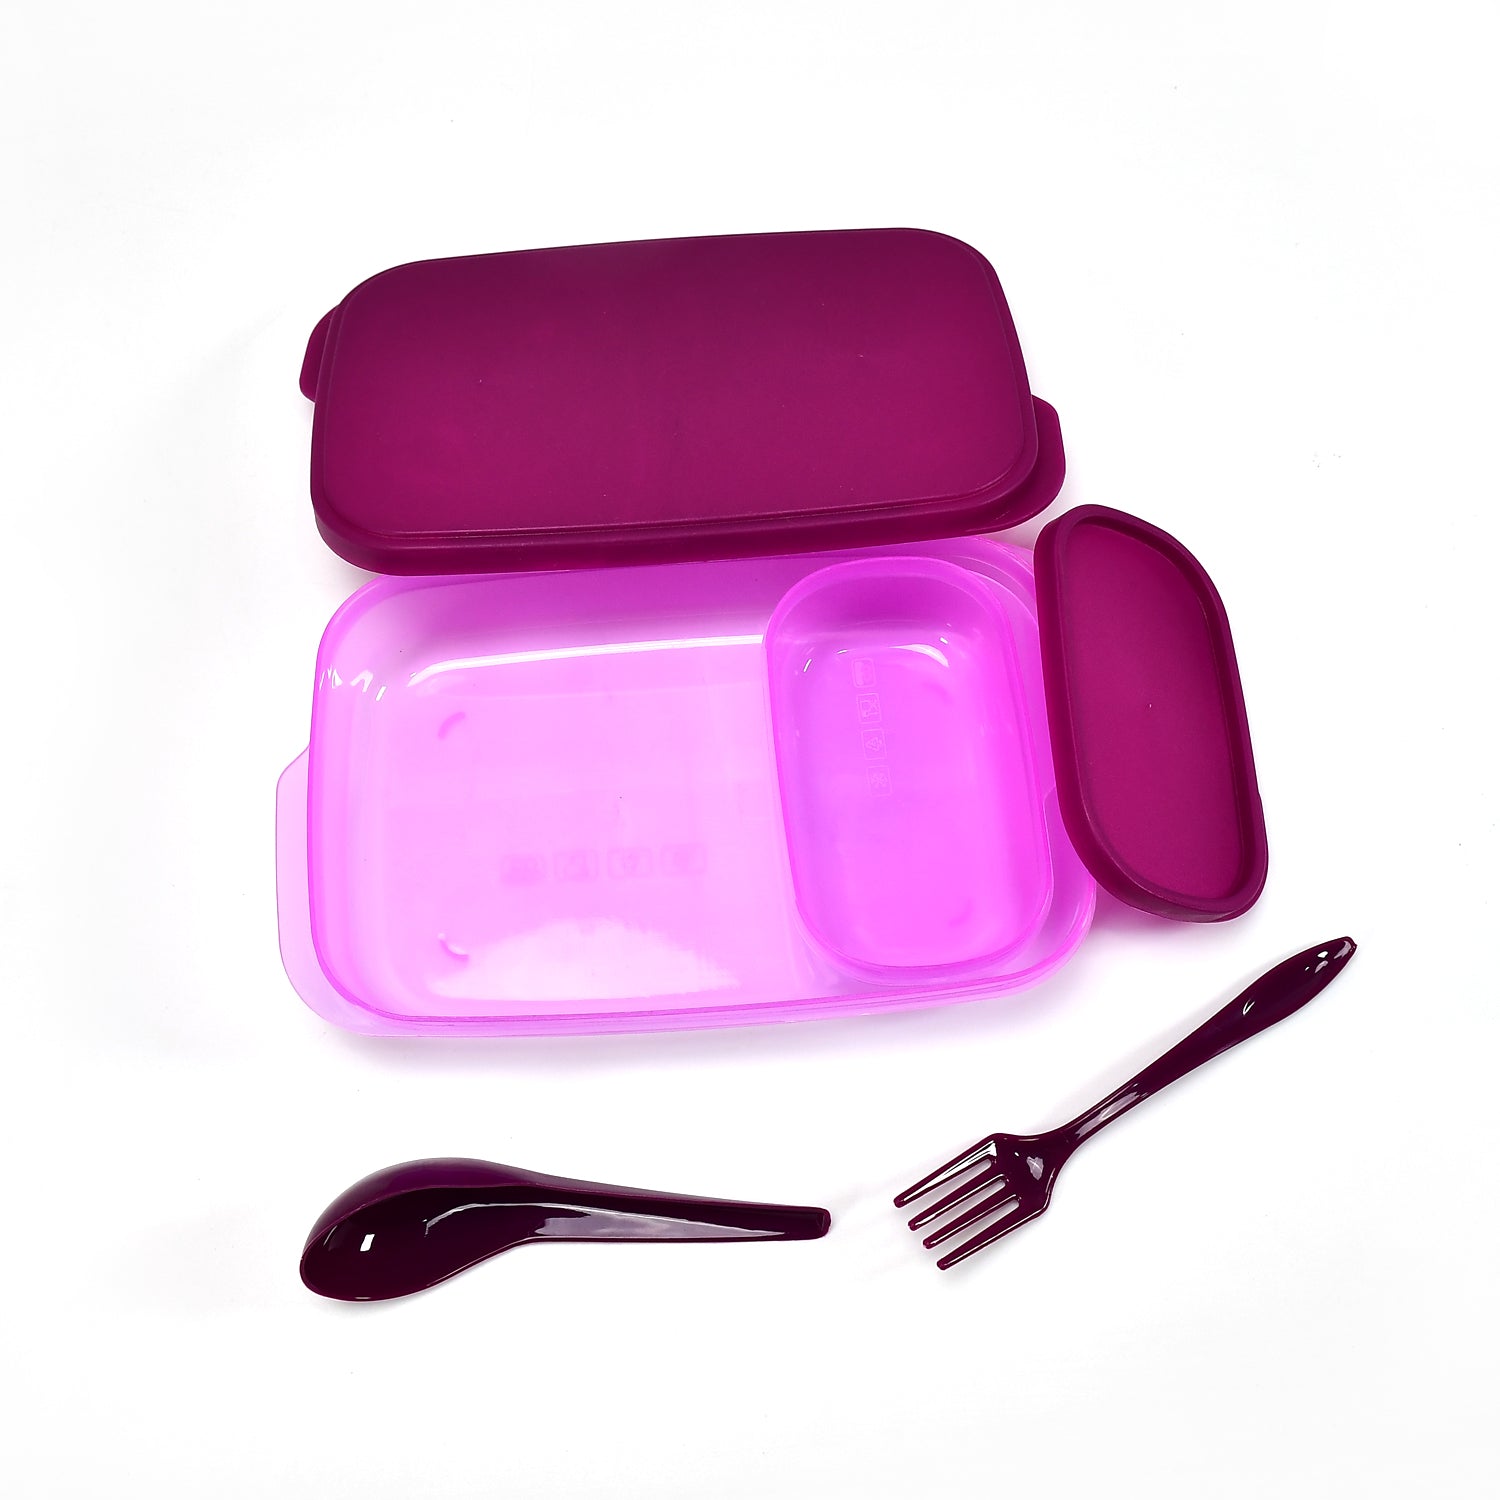 2453 Unbreakable Divine Leak Proof Plastic Lunch Box Food Grade Plastic BPA-Free 2 Containers with Spoon 